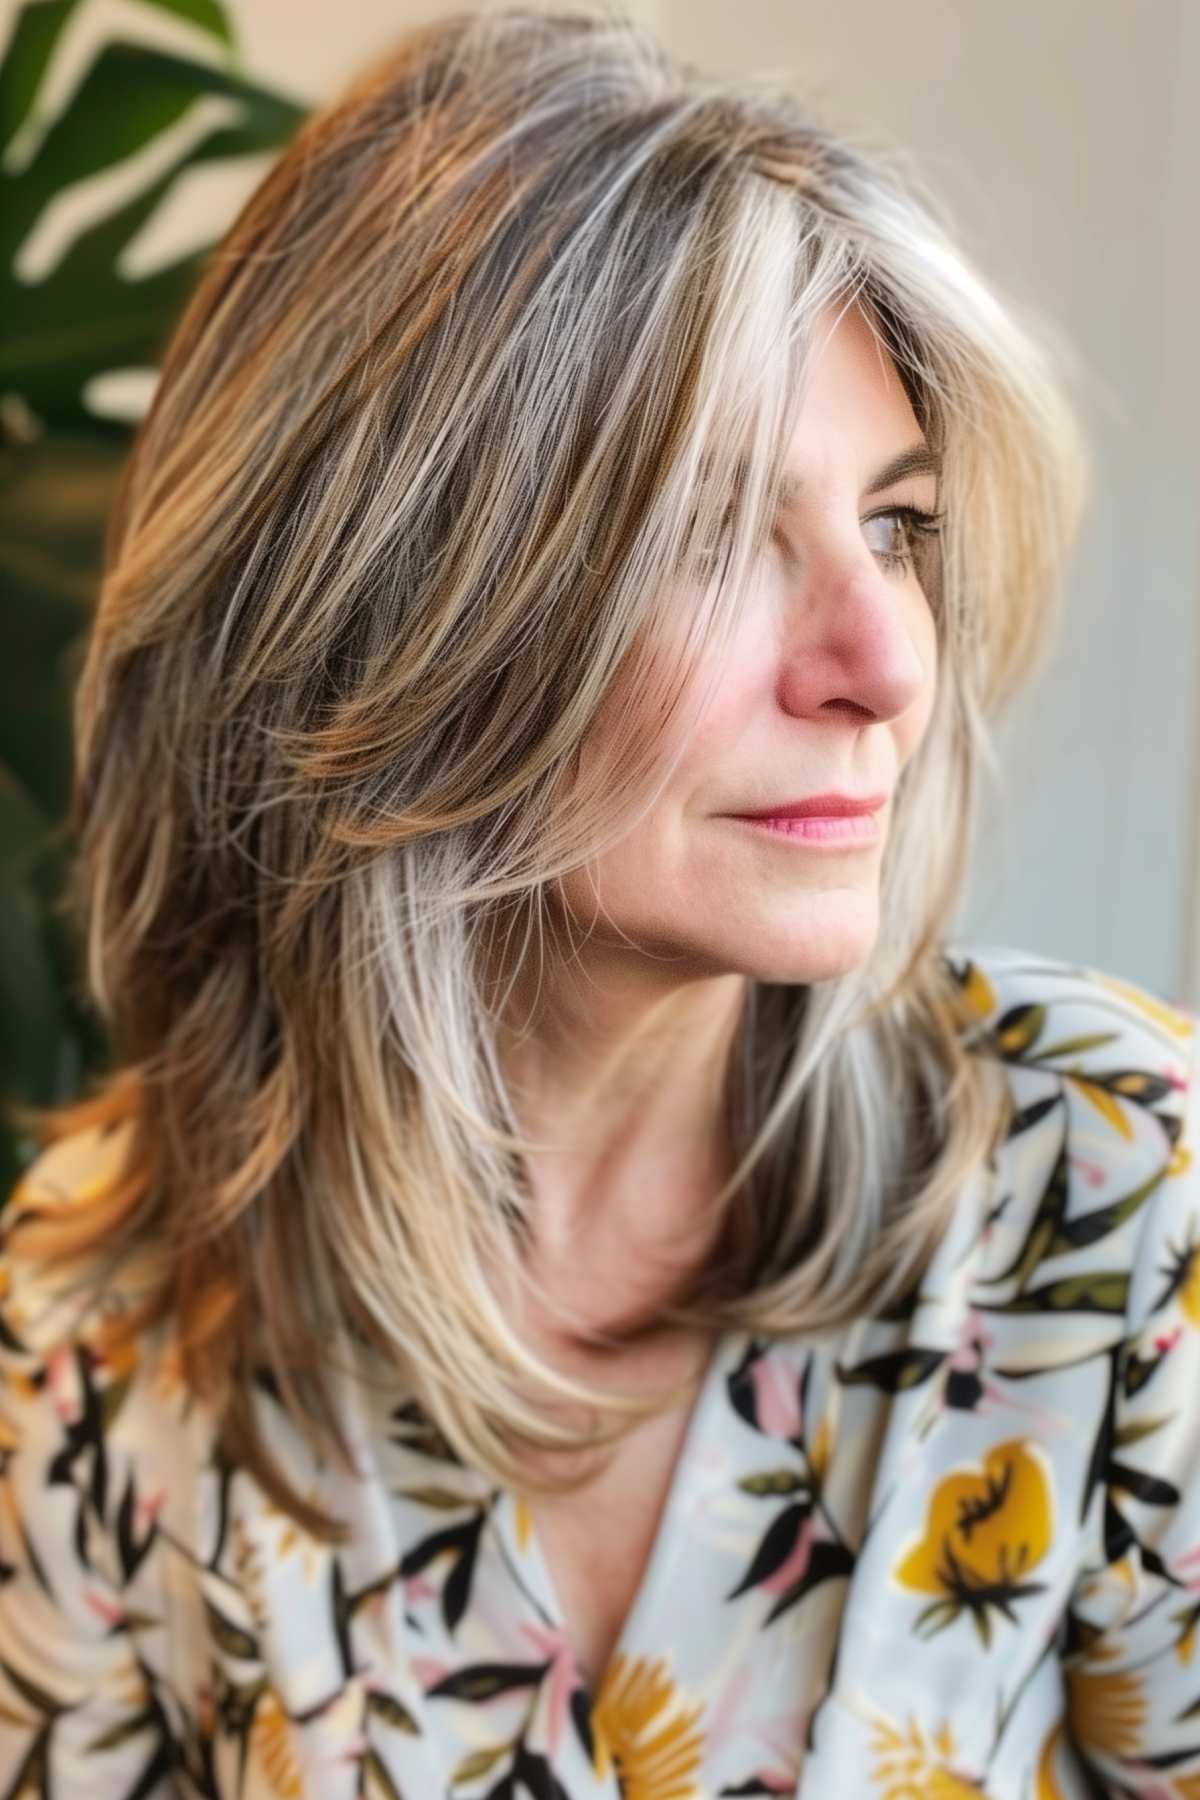 Casual layered haircut with grey and honey blonde highlights on a woman over 50, styled to showcase natural volume and texture.